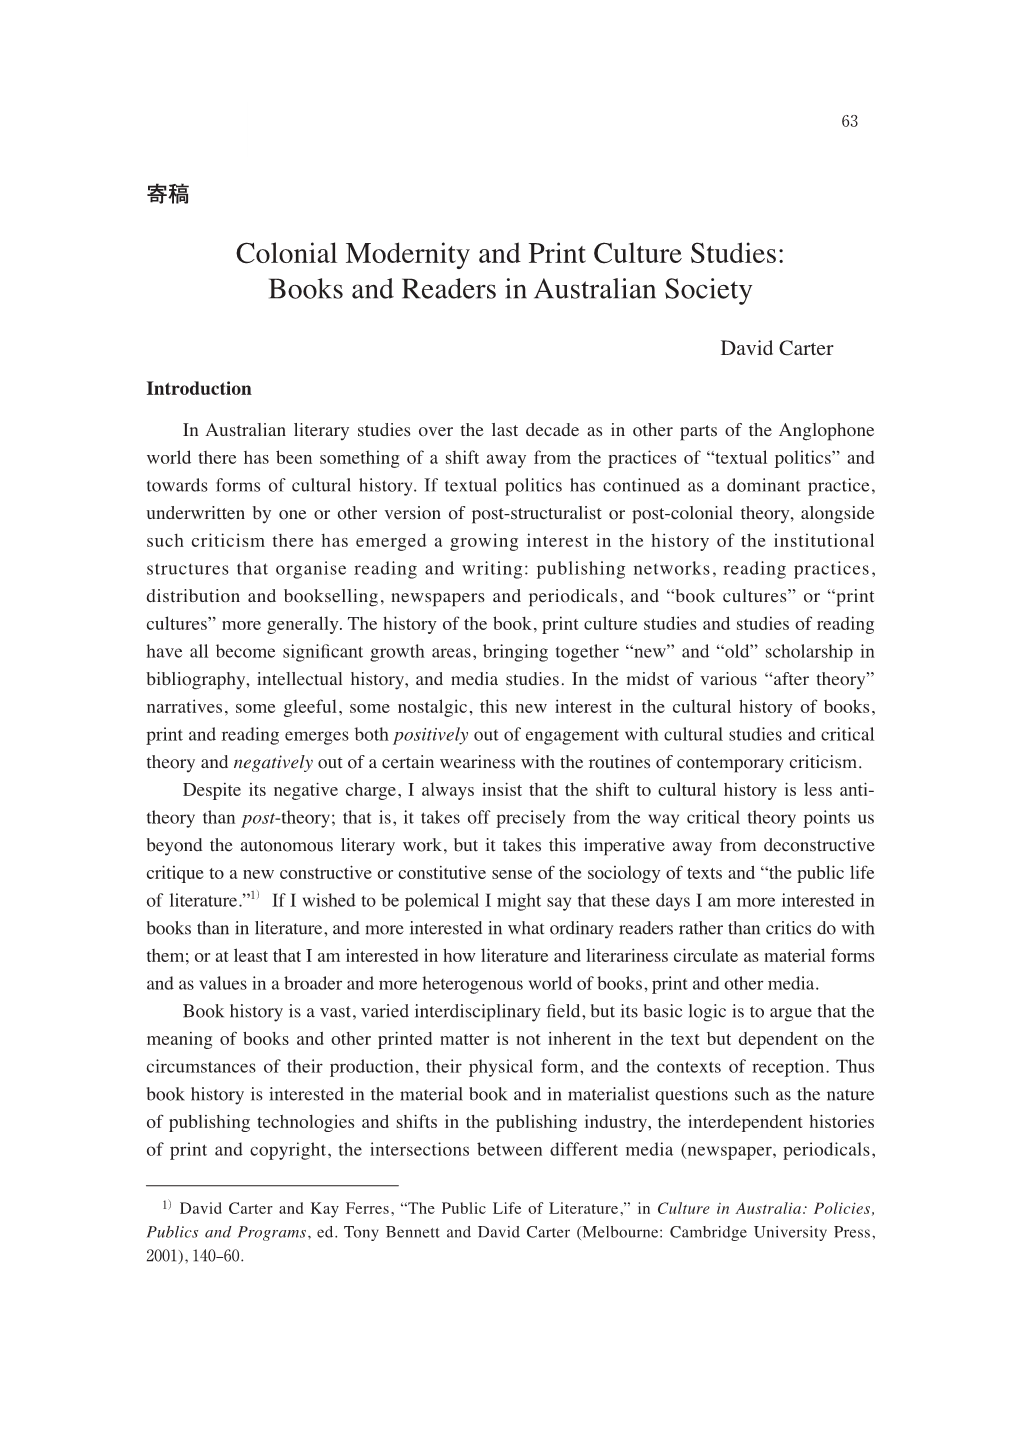 Colonial Modernity and Print Culture Studies: Books and Readers in Australian Society